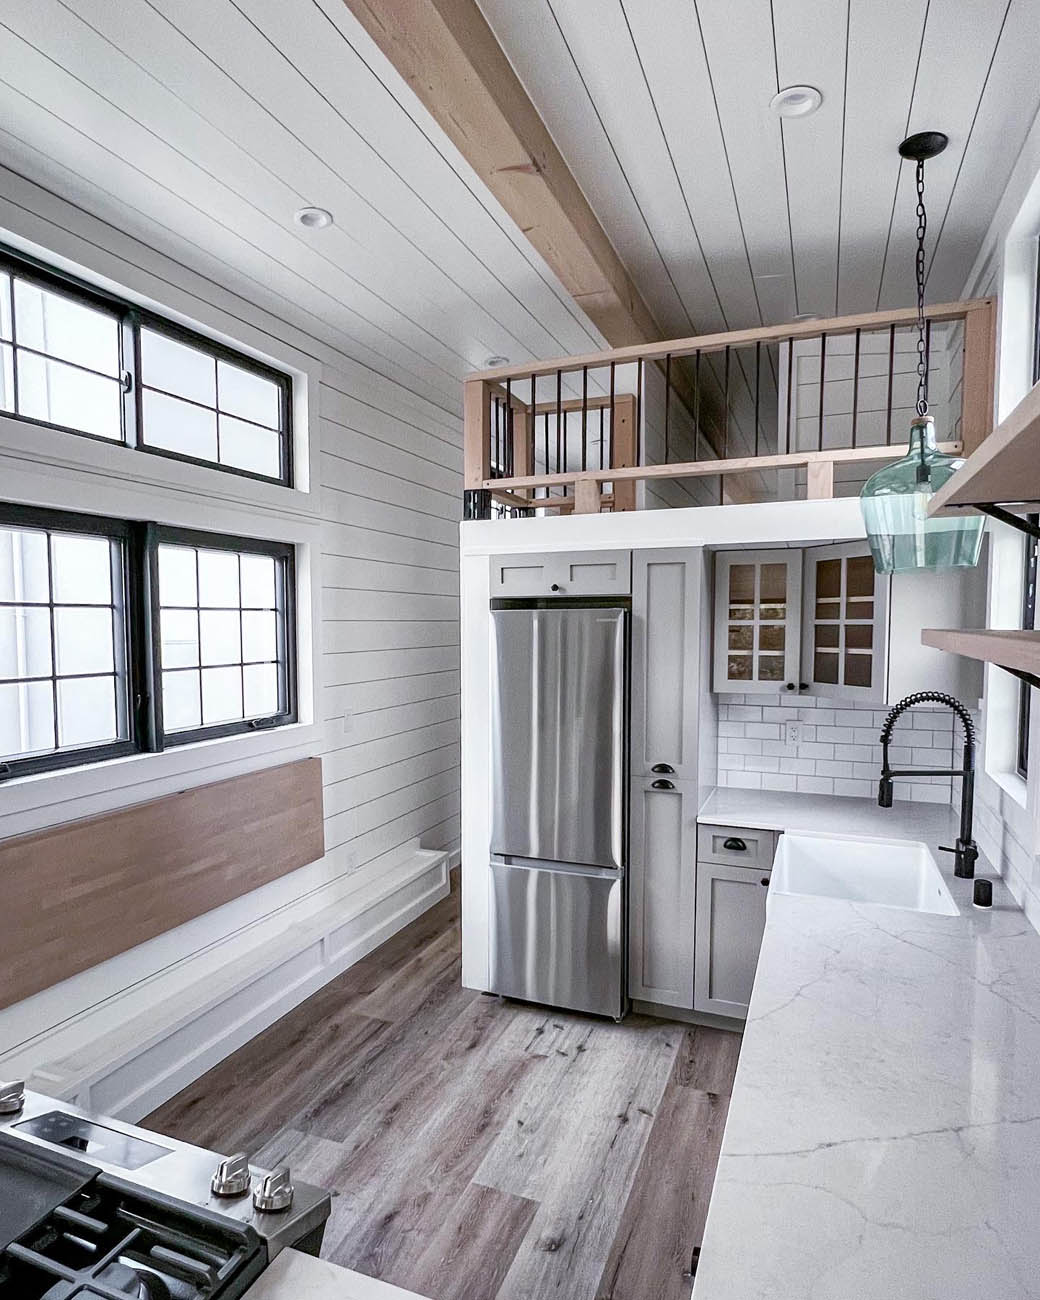 Inside a tiny ADU kitchen with a bedding loft, provided by Anchored Tiny Homes custom small home builder in Salt Lake City.